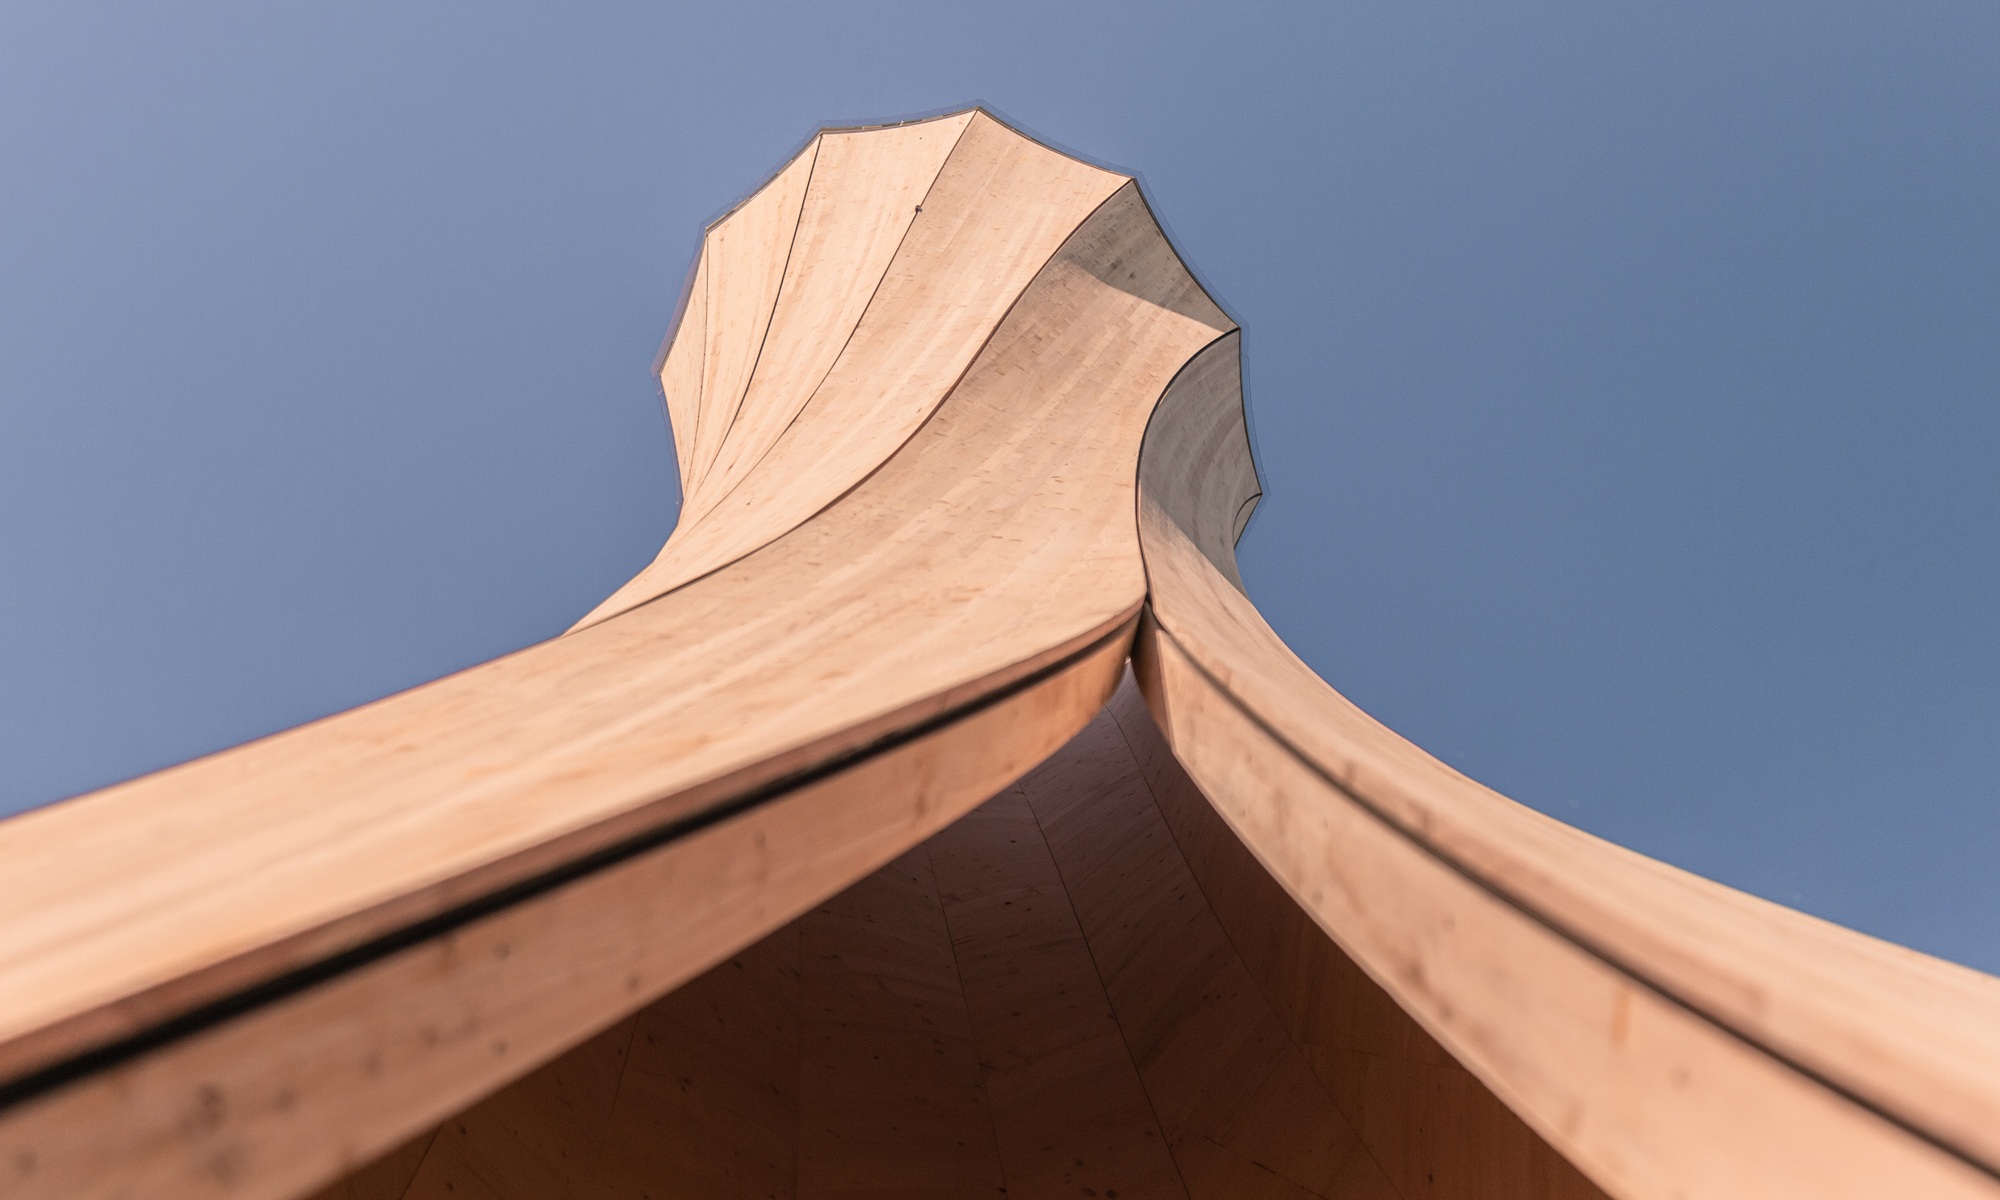 Close-up of the Urbach Tower from below looking towards the sky. The specially formed, gyrating wooden structure is clearly visible